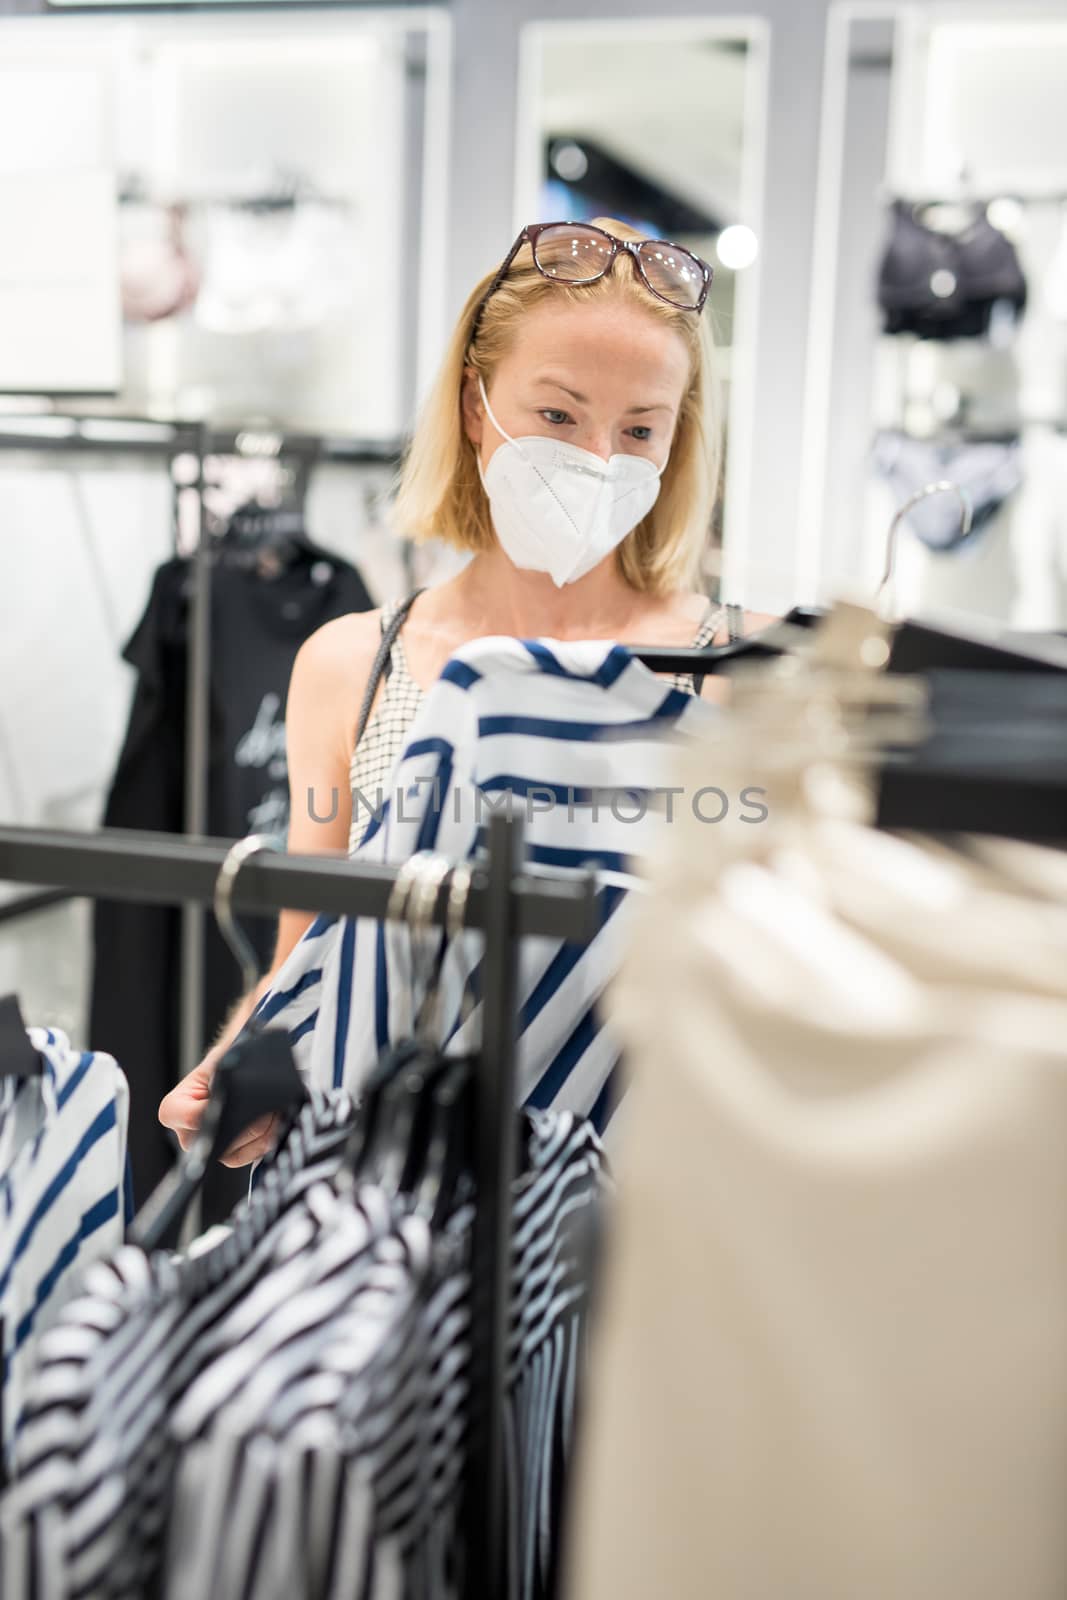 Fashionable woman wearing protective face mask shopping clothes in reopen retail shopping store. New normal lifestyle during corona virus pandemic by kasto